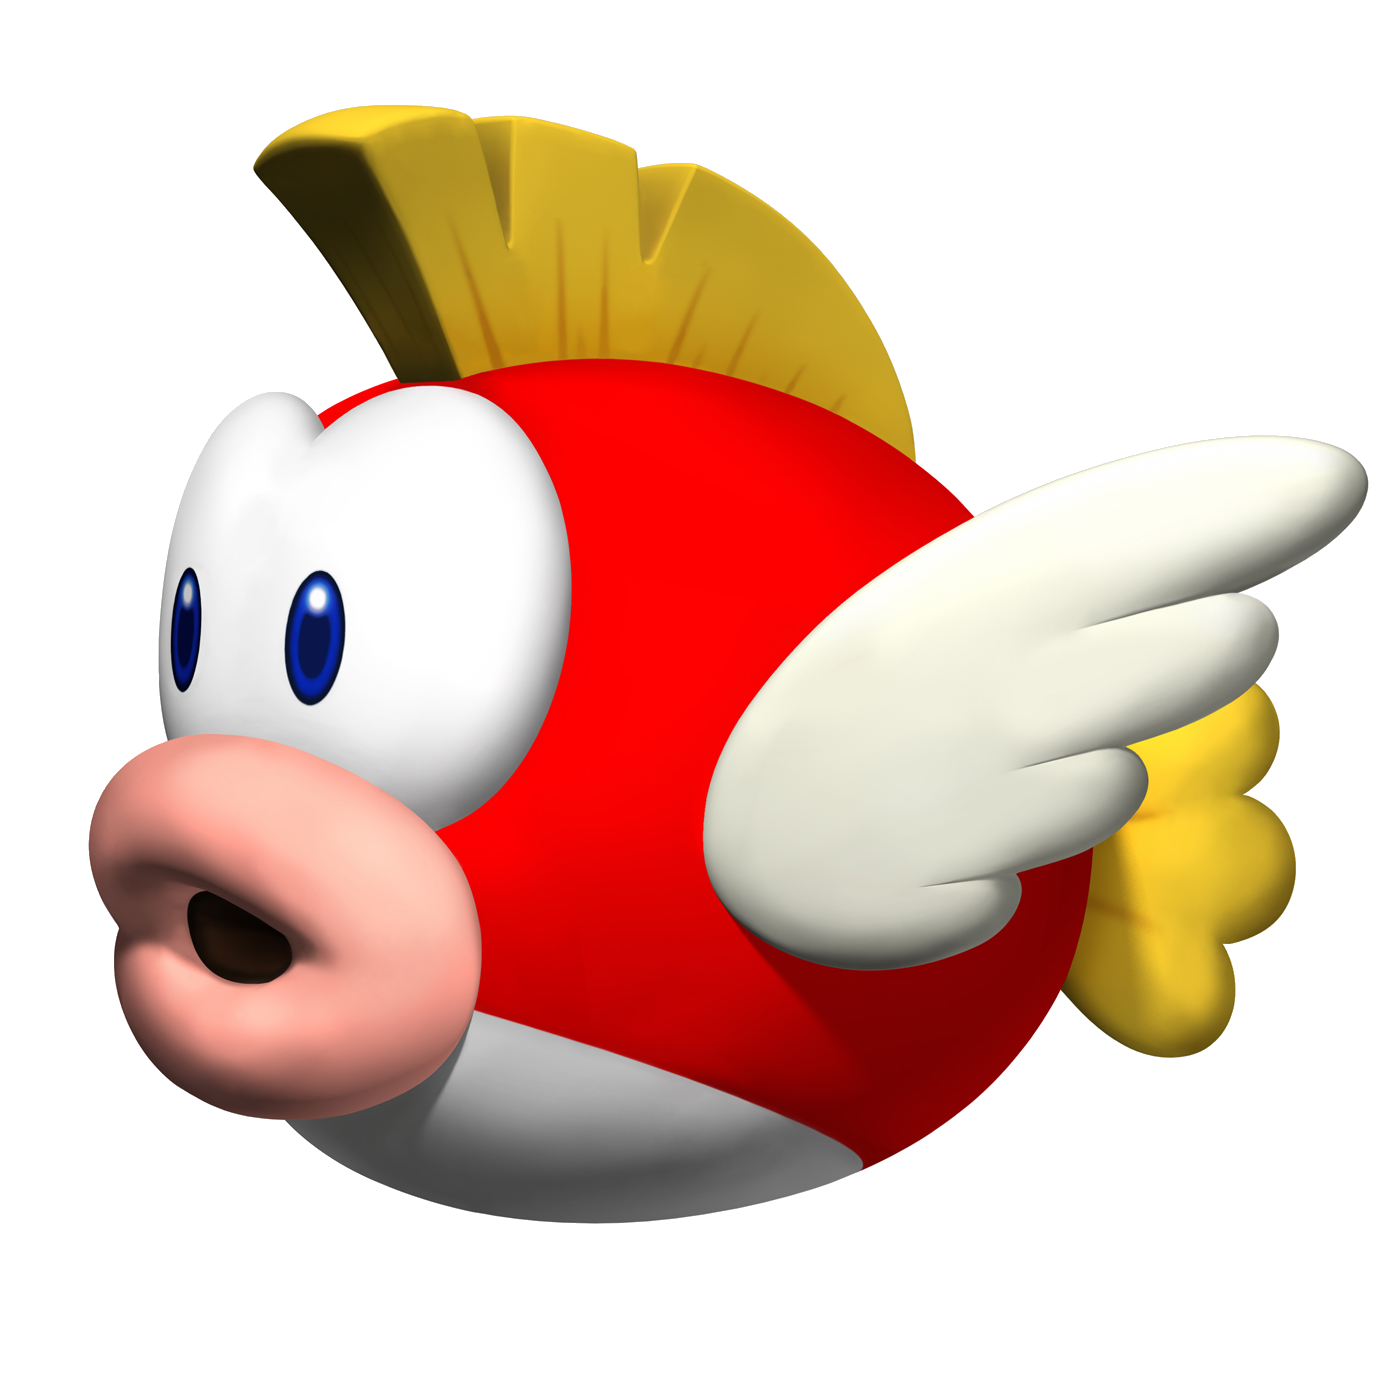 Image cheep fantendo nintendo. Cool png images